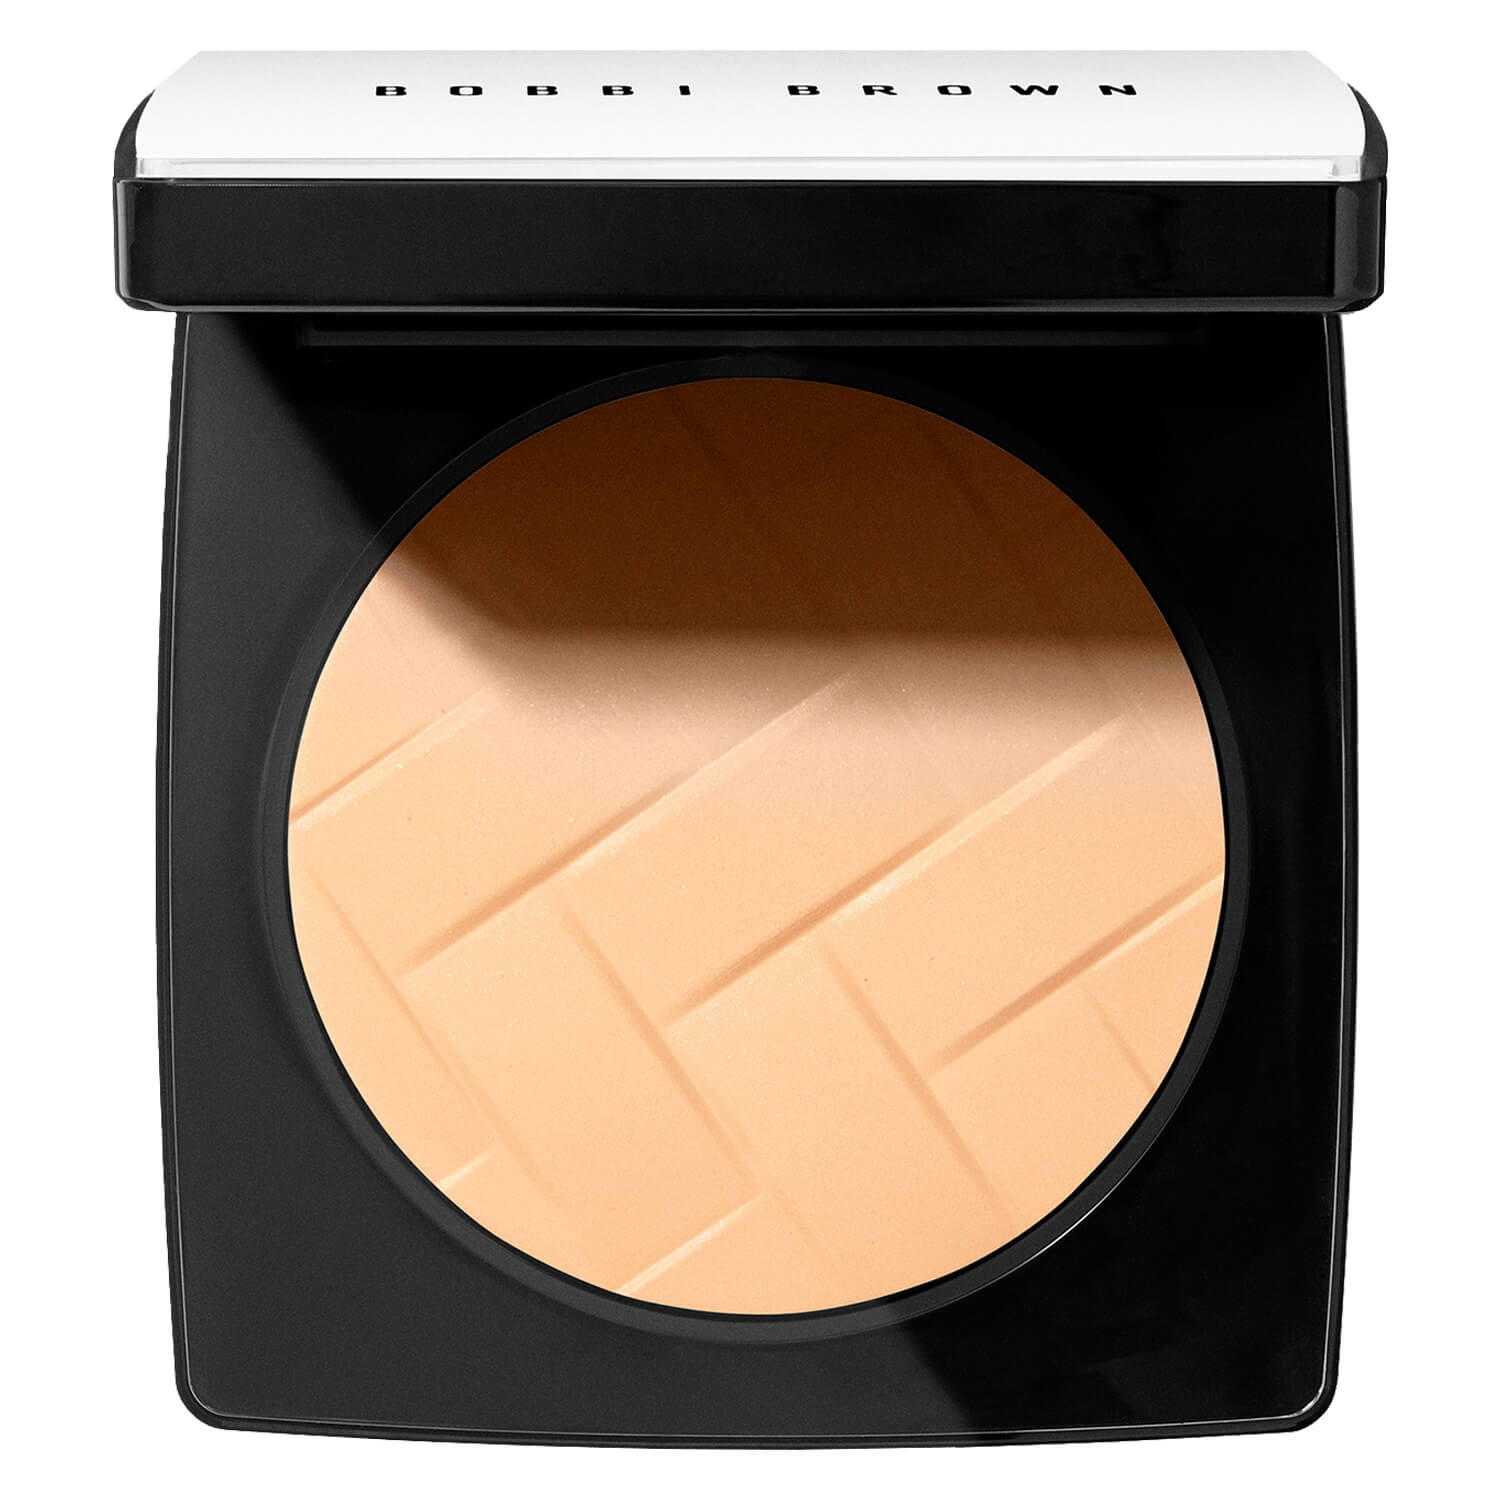 Product image from BB Powder - Vitamin Enriched Pressed Powder Neutral